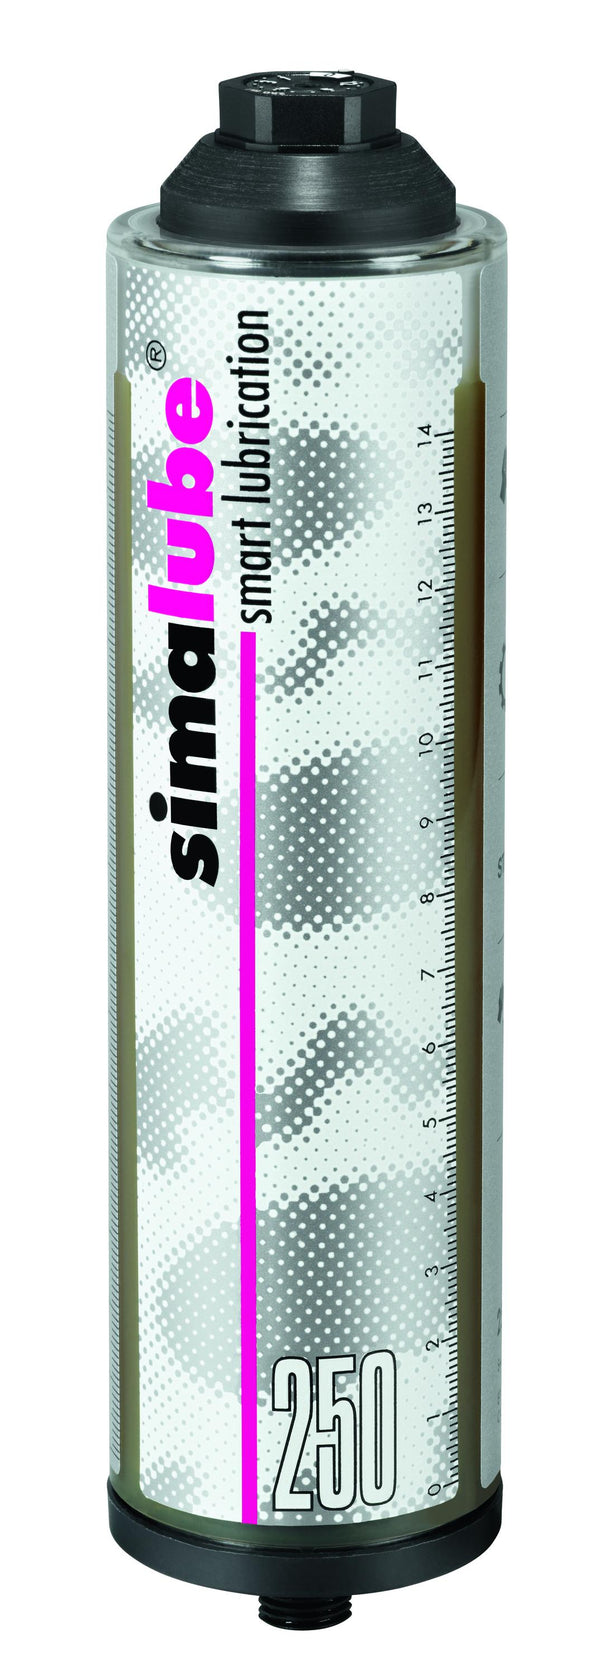 Simalube lubricator filled with calcium sulonate grease 250ml